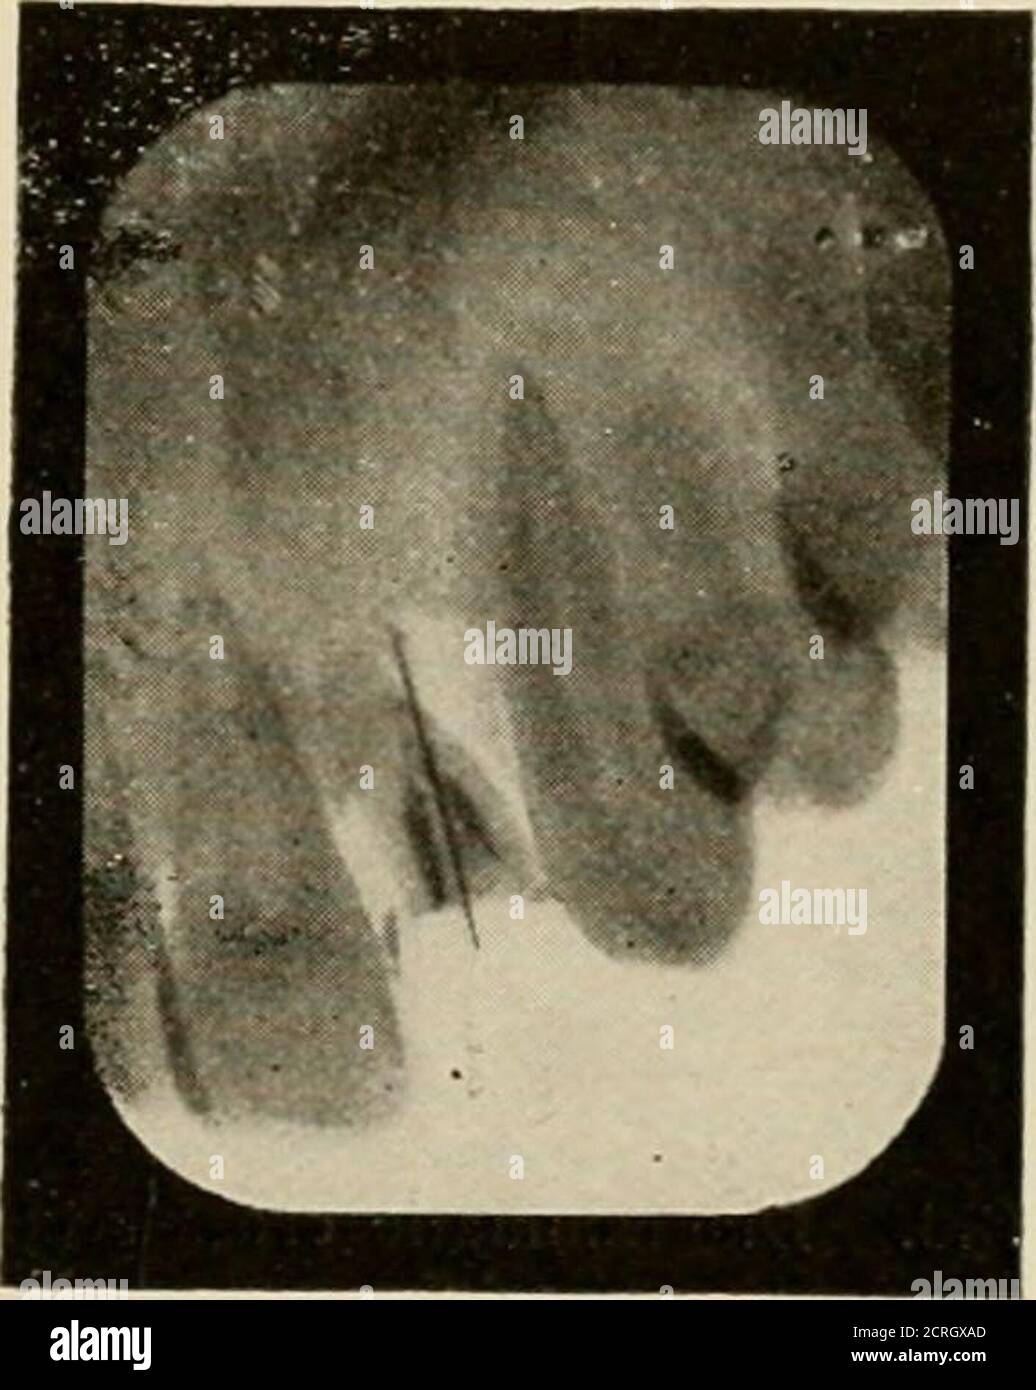 . Elementary and dental radiography / by Howard Riley Raper . Fig. 433. Same as Fie. 432. Radiograph notFie. Al. Wire apparently followine canal in distorted. See wire passing through upper lateral runt. Distorted radiograph. side of root to the distal. have heen directed through the tooth at a different angle (arrow No. 3,Fig. 436) and the outline of the roots is comparatively distinct. When the X-rays pass through the tooth as indi-Tifl. 436. cated by arrows 1 and 2, Fig. 436, the outline of the roots will be more or less indistinct; when the rayspass straight through the tooth, as indicate Stock Photo